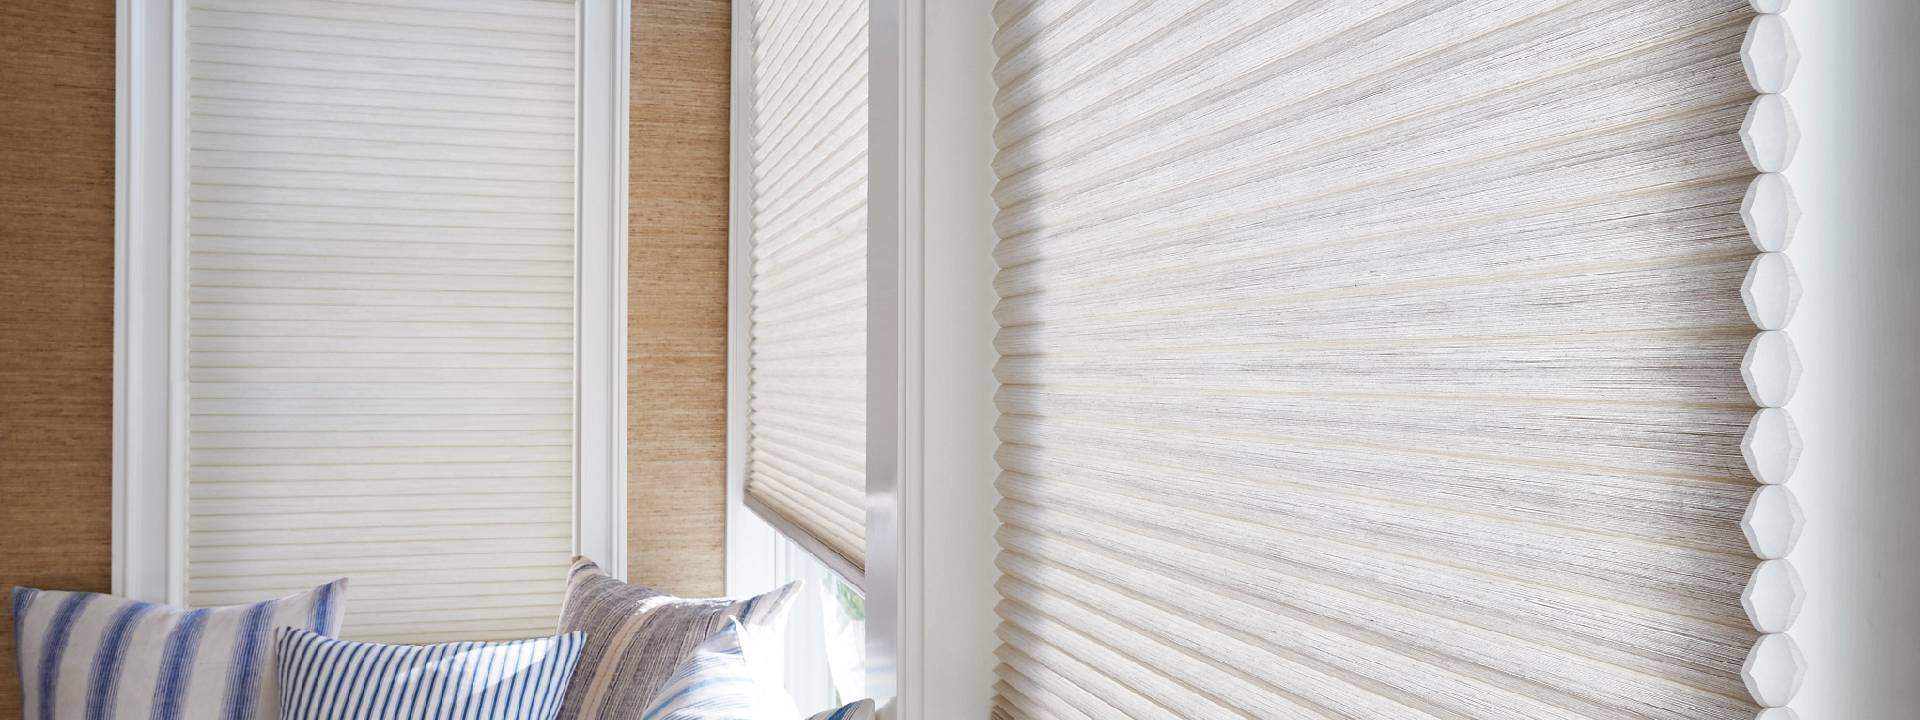 Hunter Douglas Duette® Honeycomb Shades are an energy-efficient window treatment for your home